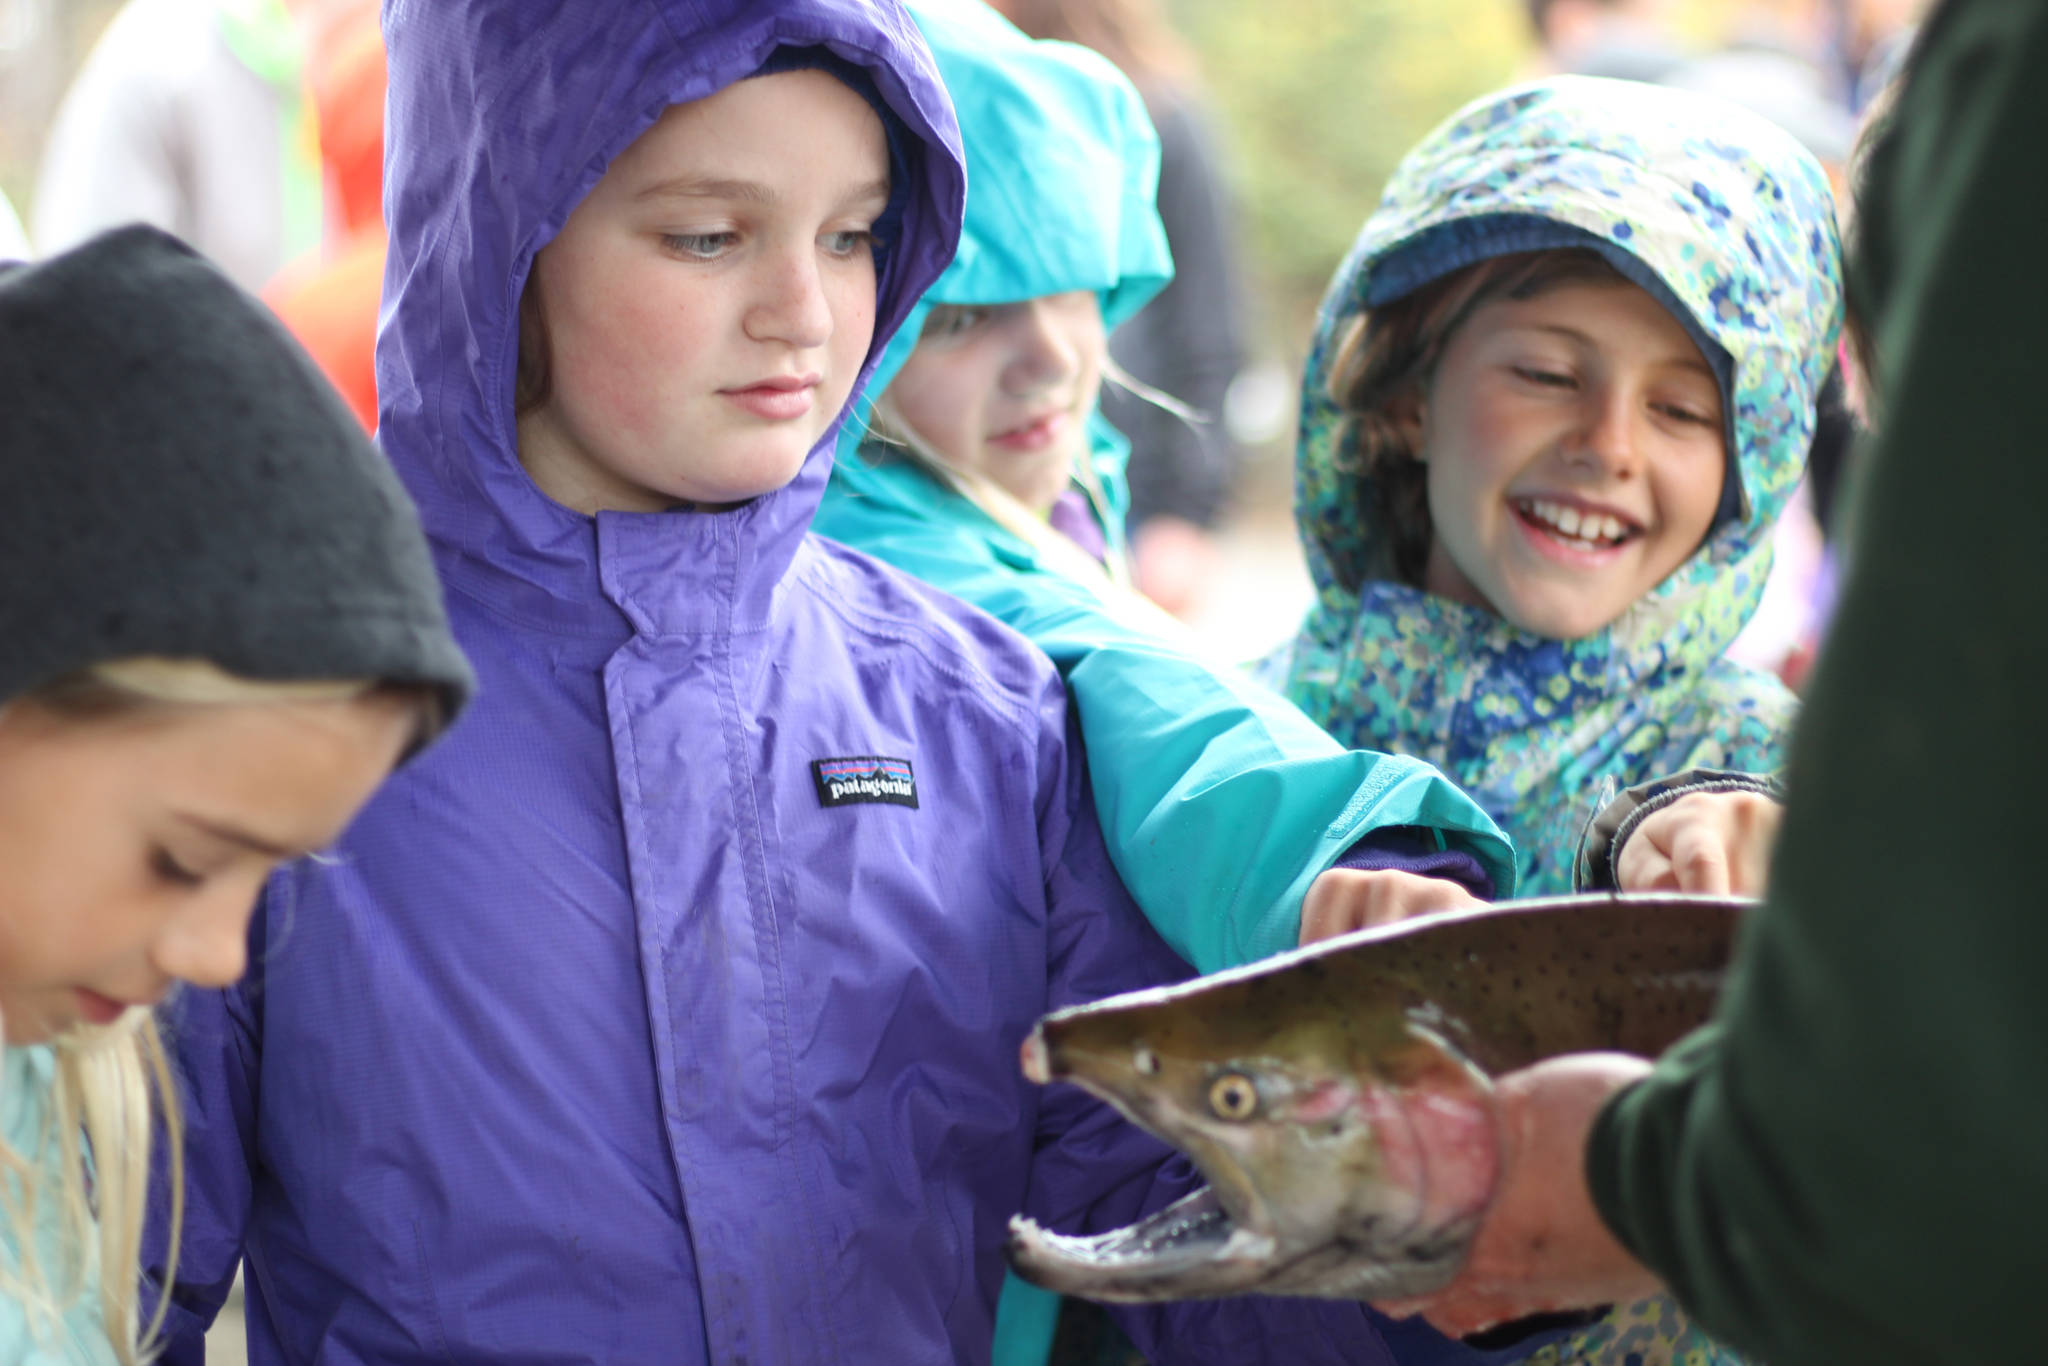 Students get an up close look at a salmon during an educational egg take trip to the Anchor River on Thursday, Oct. 4, 2018 in Anchor Point, Alaska. Eggs are harvested and fertilized, then sent back to each classroom so the students can watch them grow into fry. (Photo by Megan Pacer/Homer News)